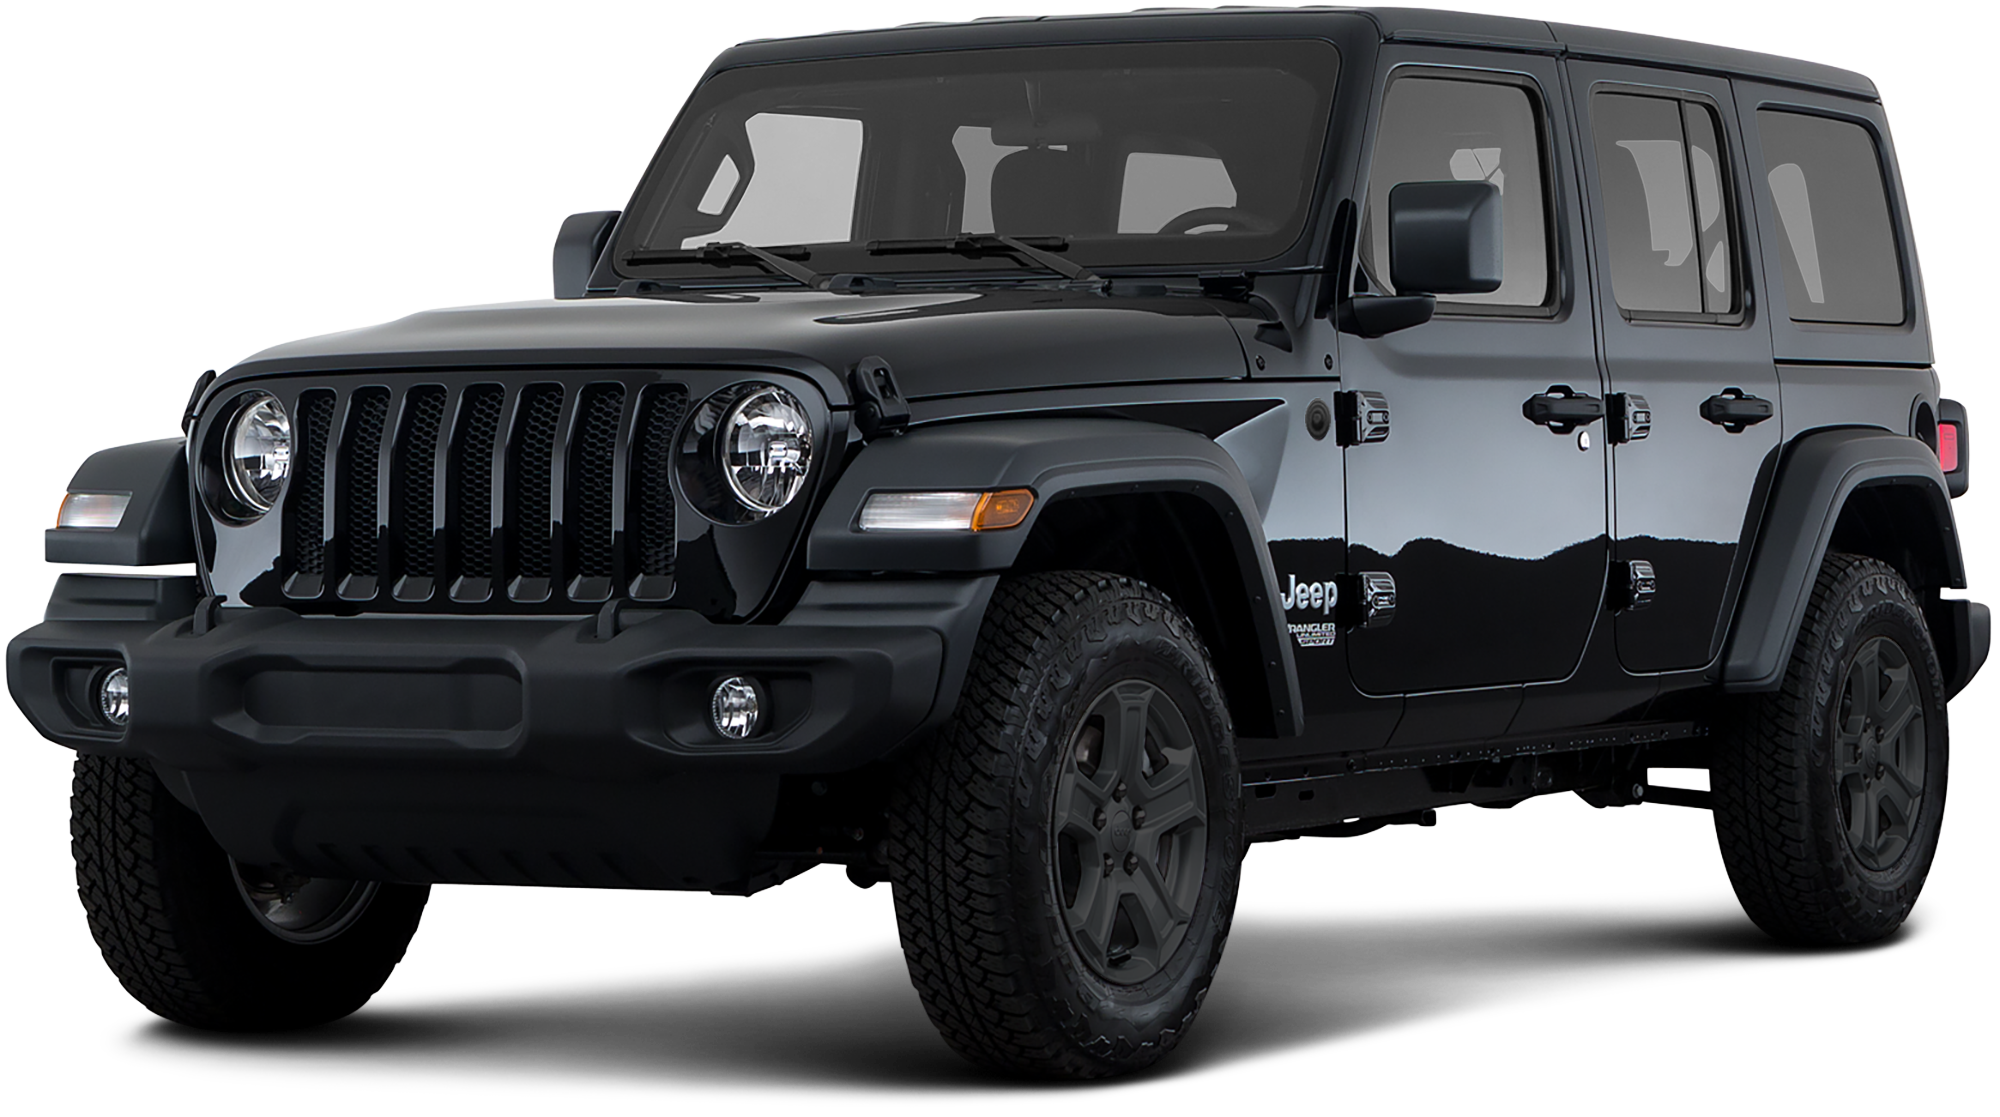 2021 Jeep Wrangler Unlimited Incentives, Specials & Offers in Clovis CA